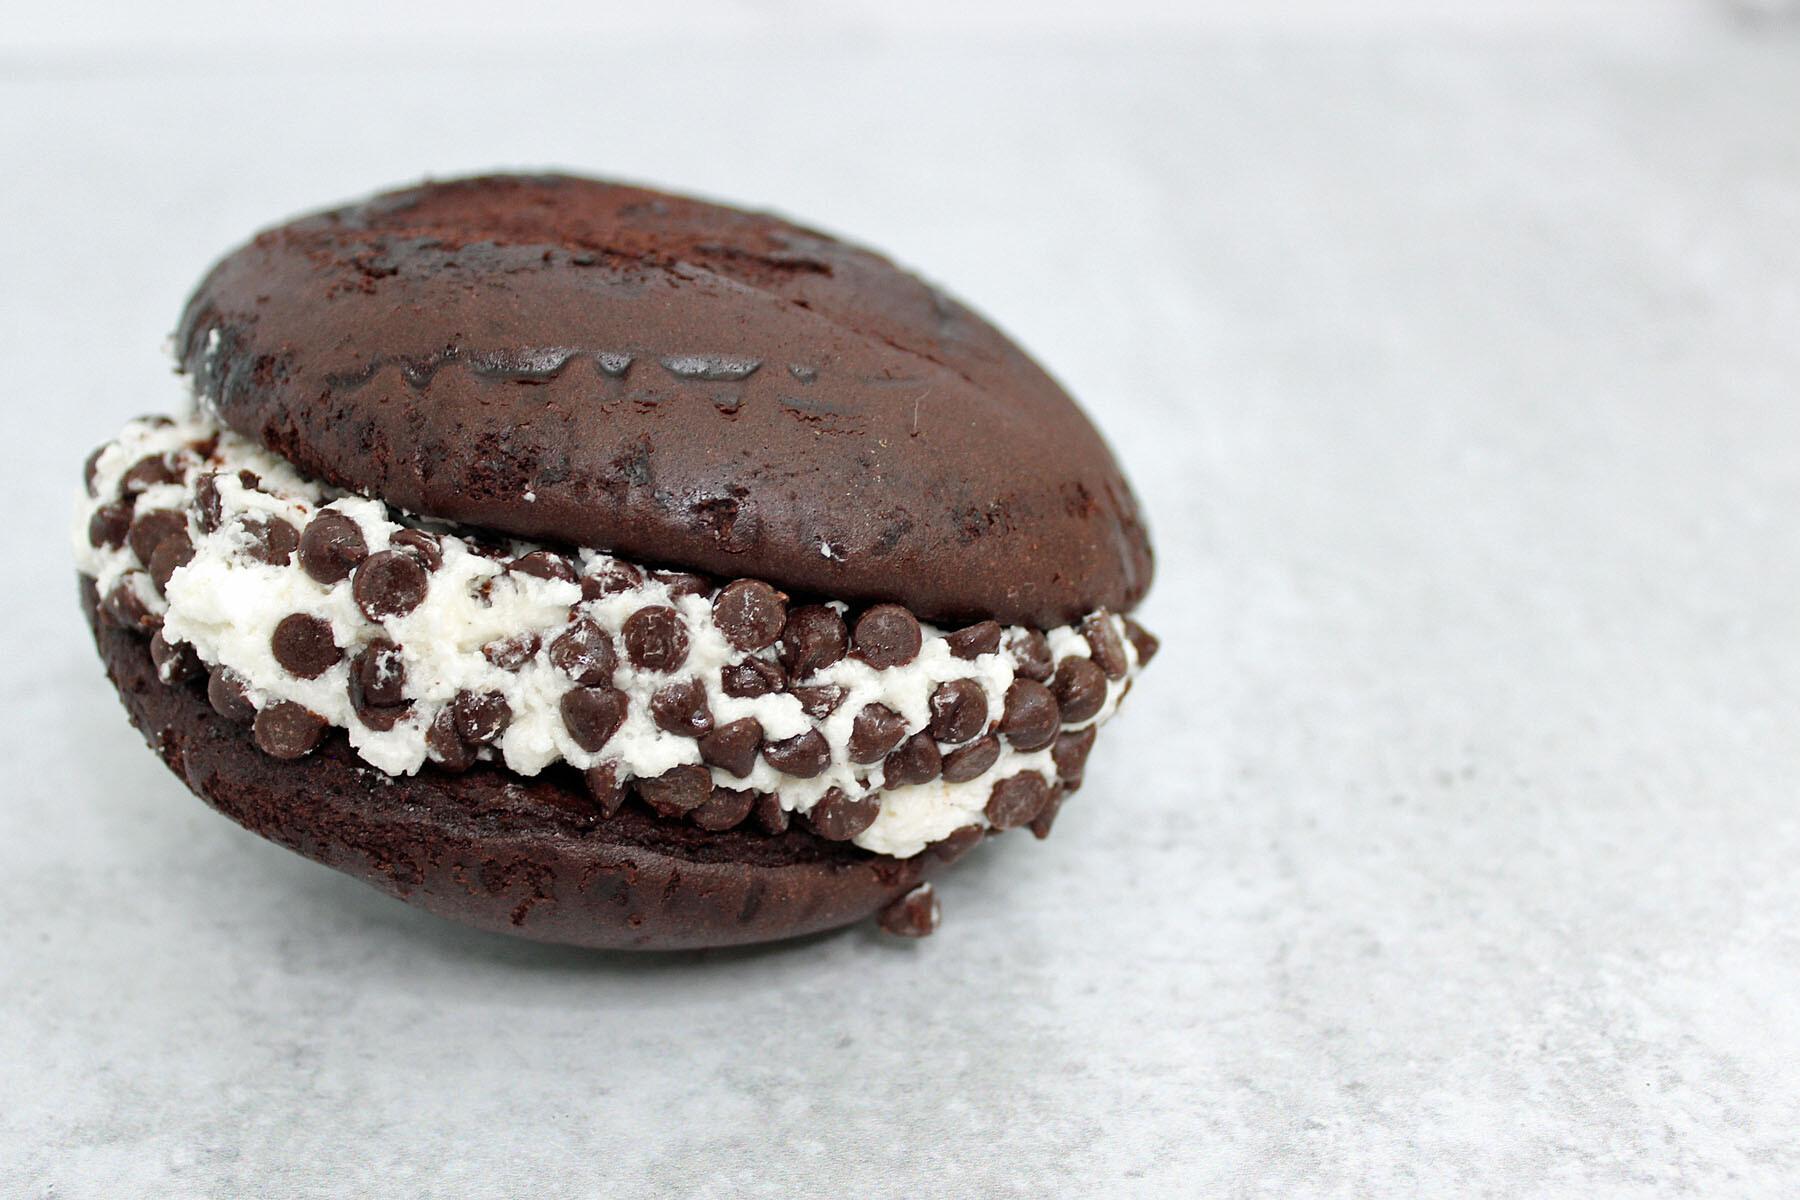 Eating for Pleasure Lessons From a Whoopie Pie